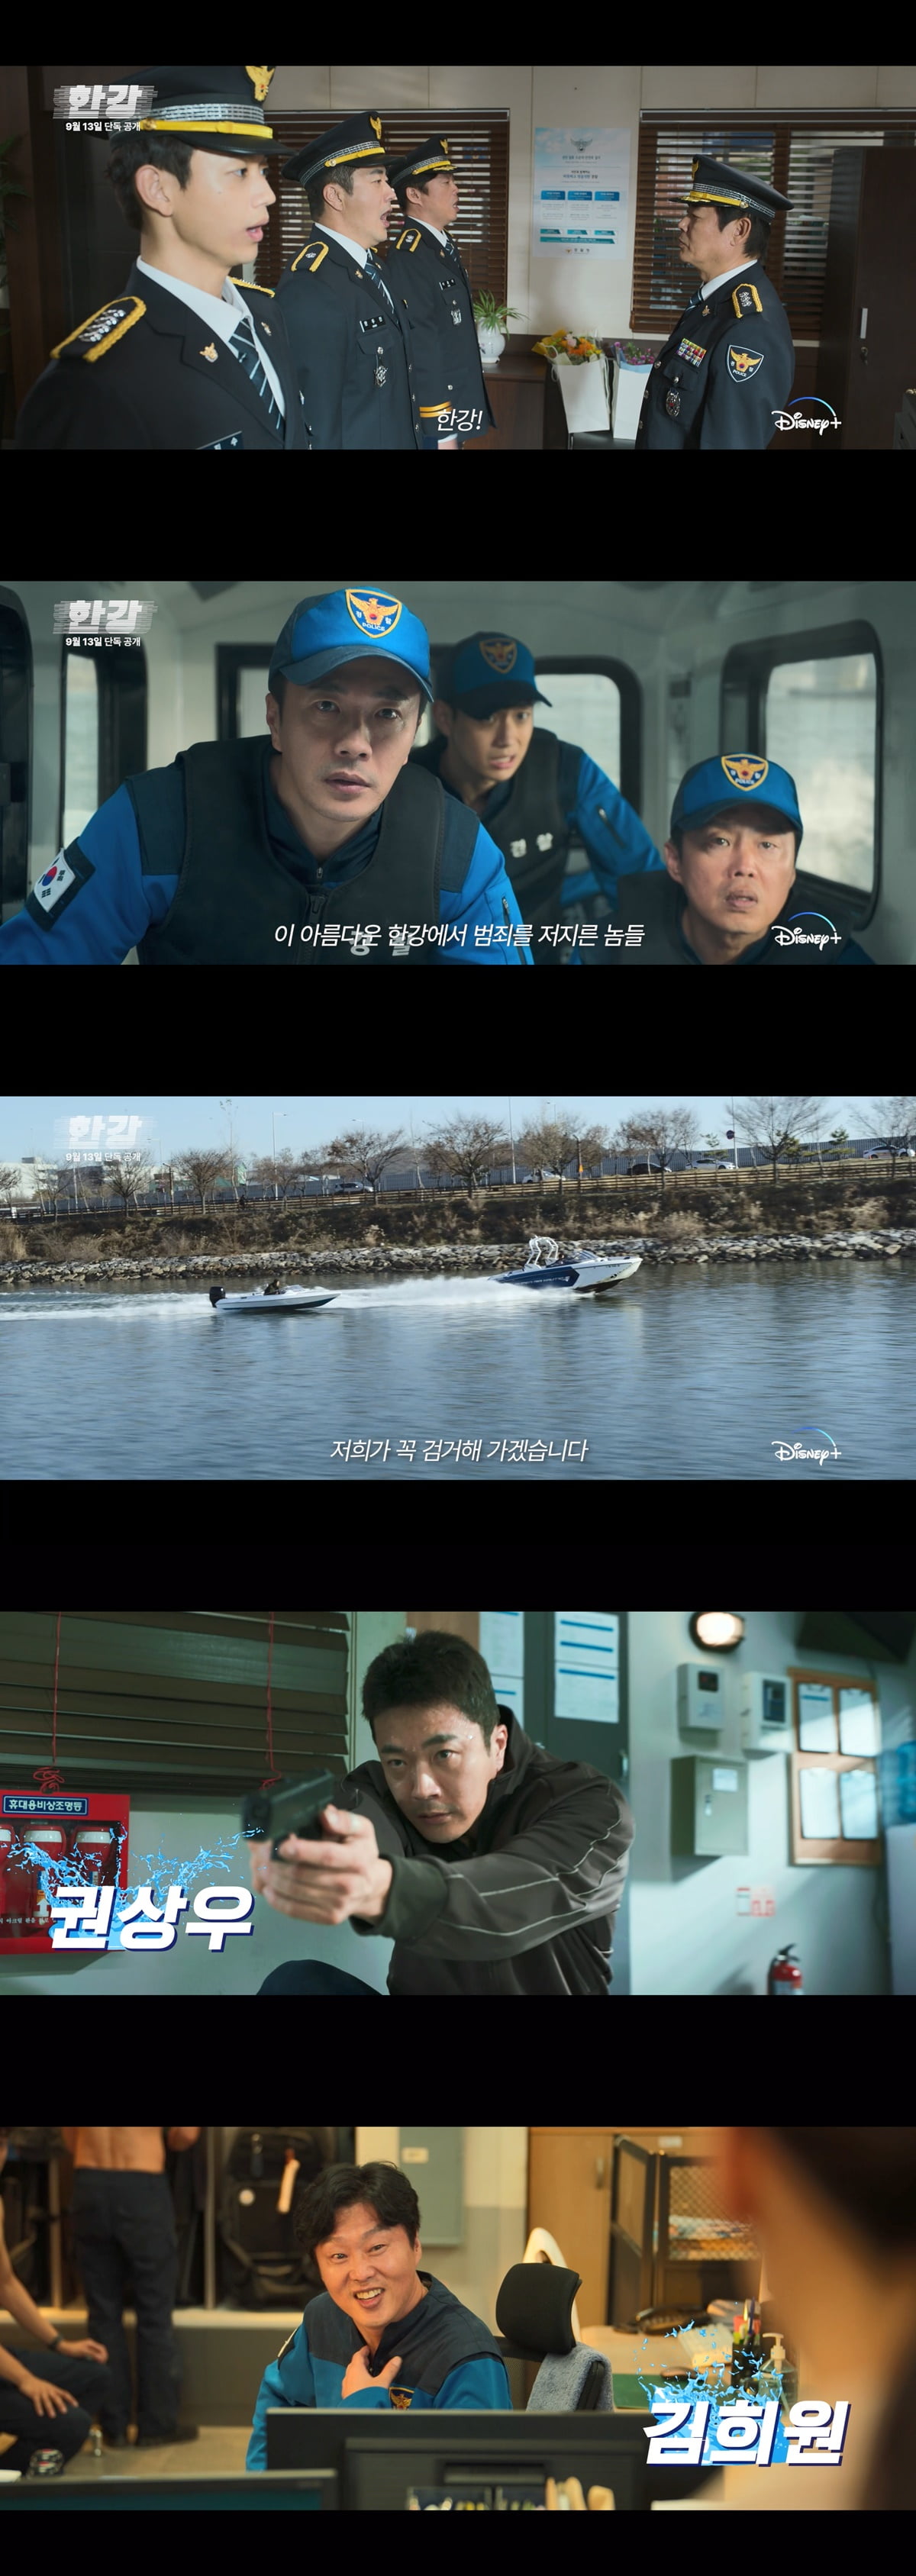 Disney+ 'Han River' to be released on September 13th